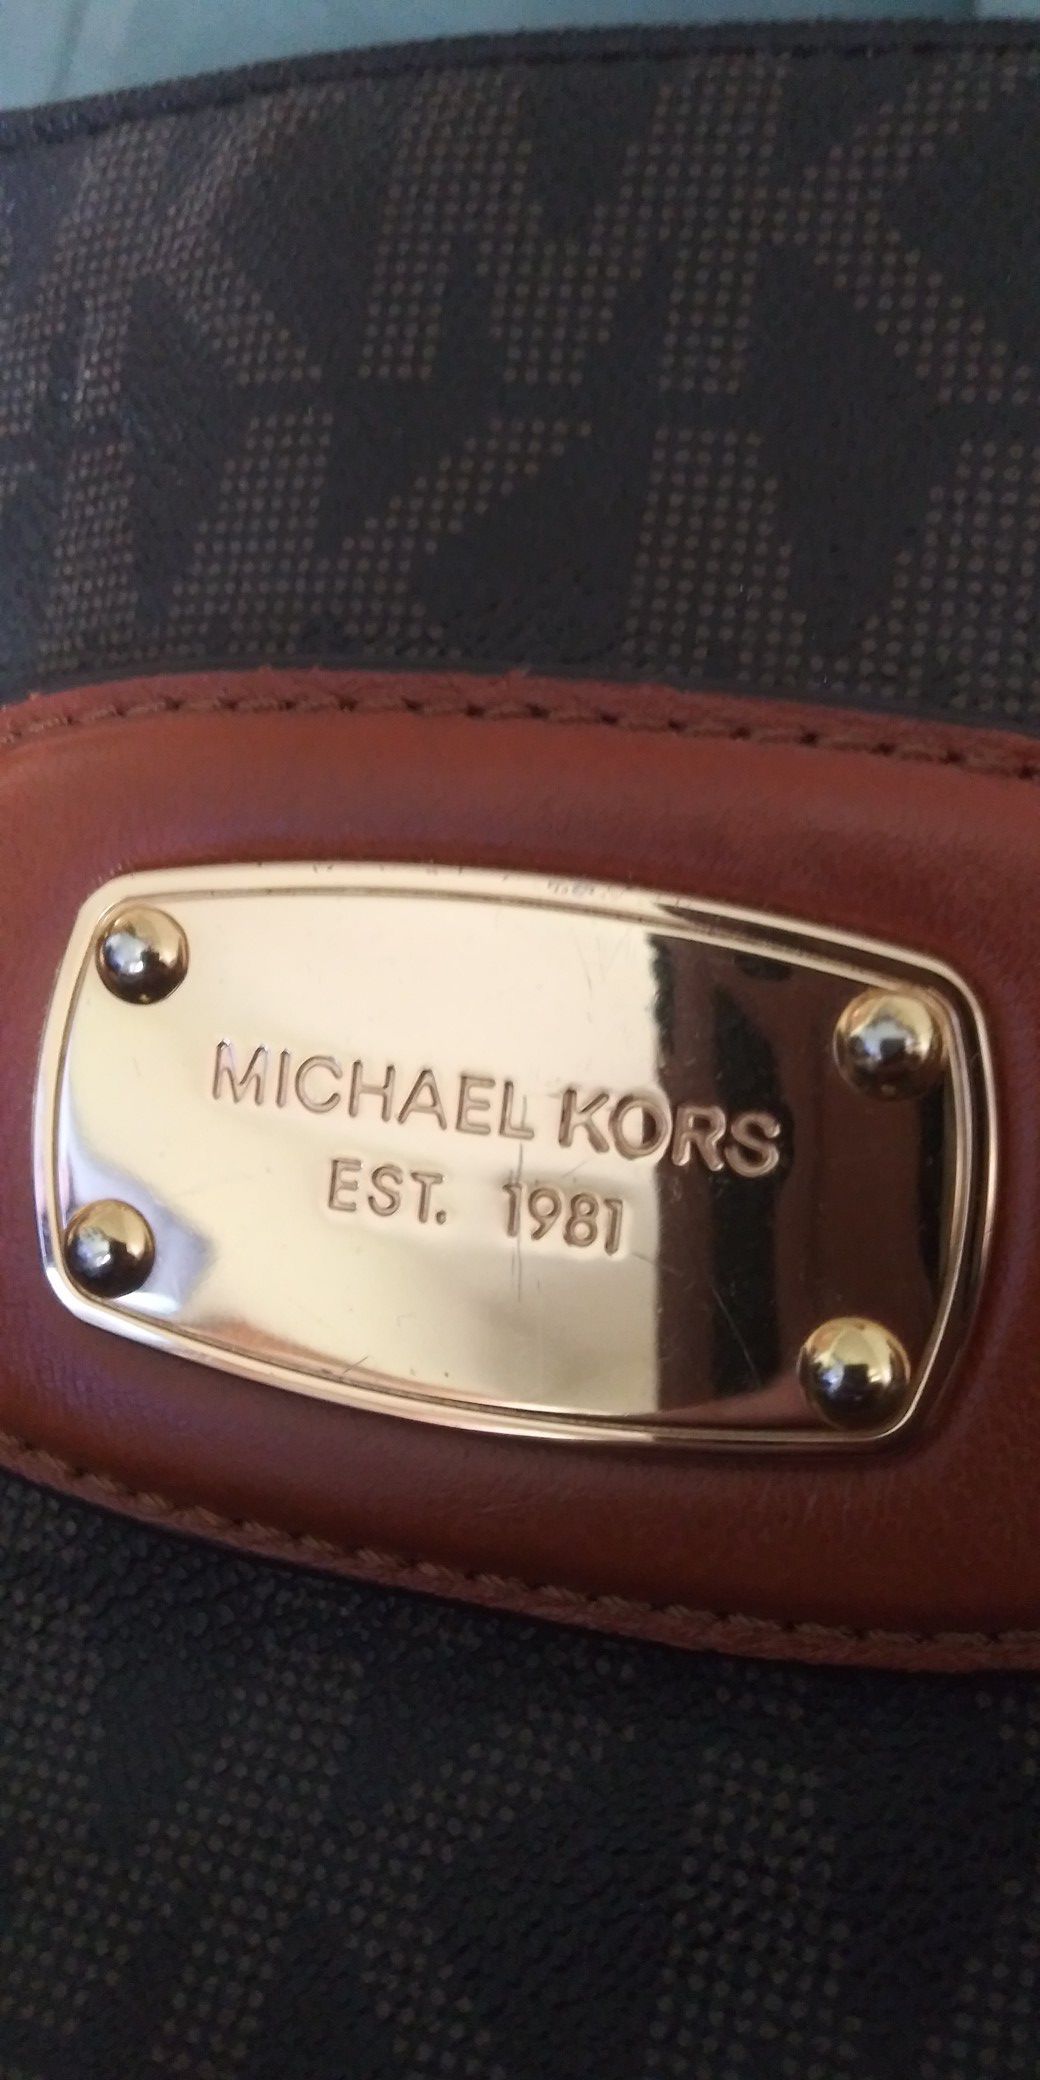 Purse michael kors Used But In Good Condition